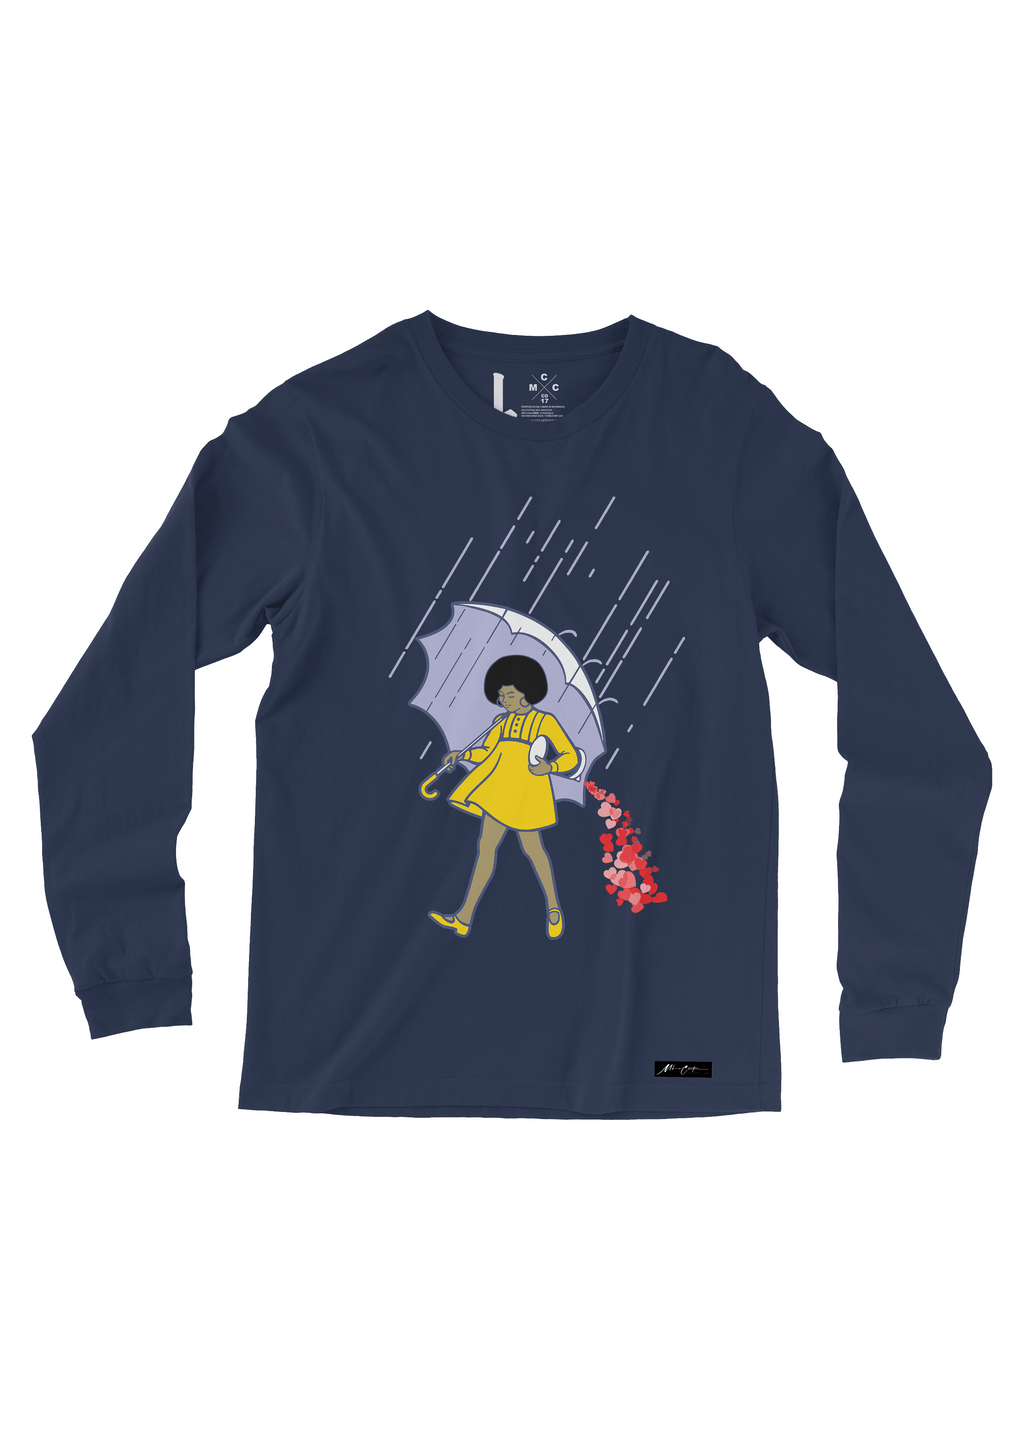 Miles Carter Designs Long Sleeve T-Shirt S Copy of Block Hate 🌧 | Spread Love ❤️